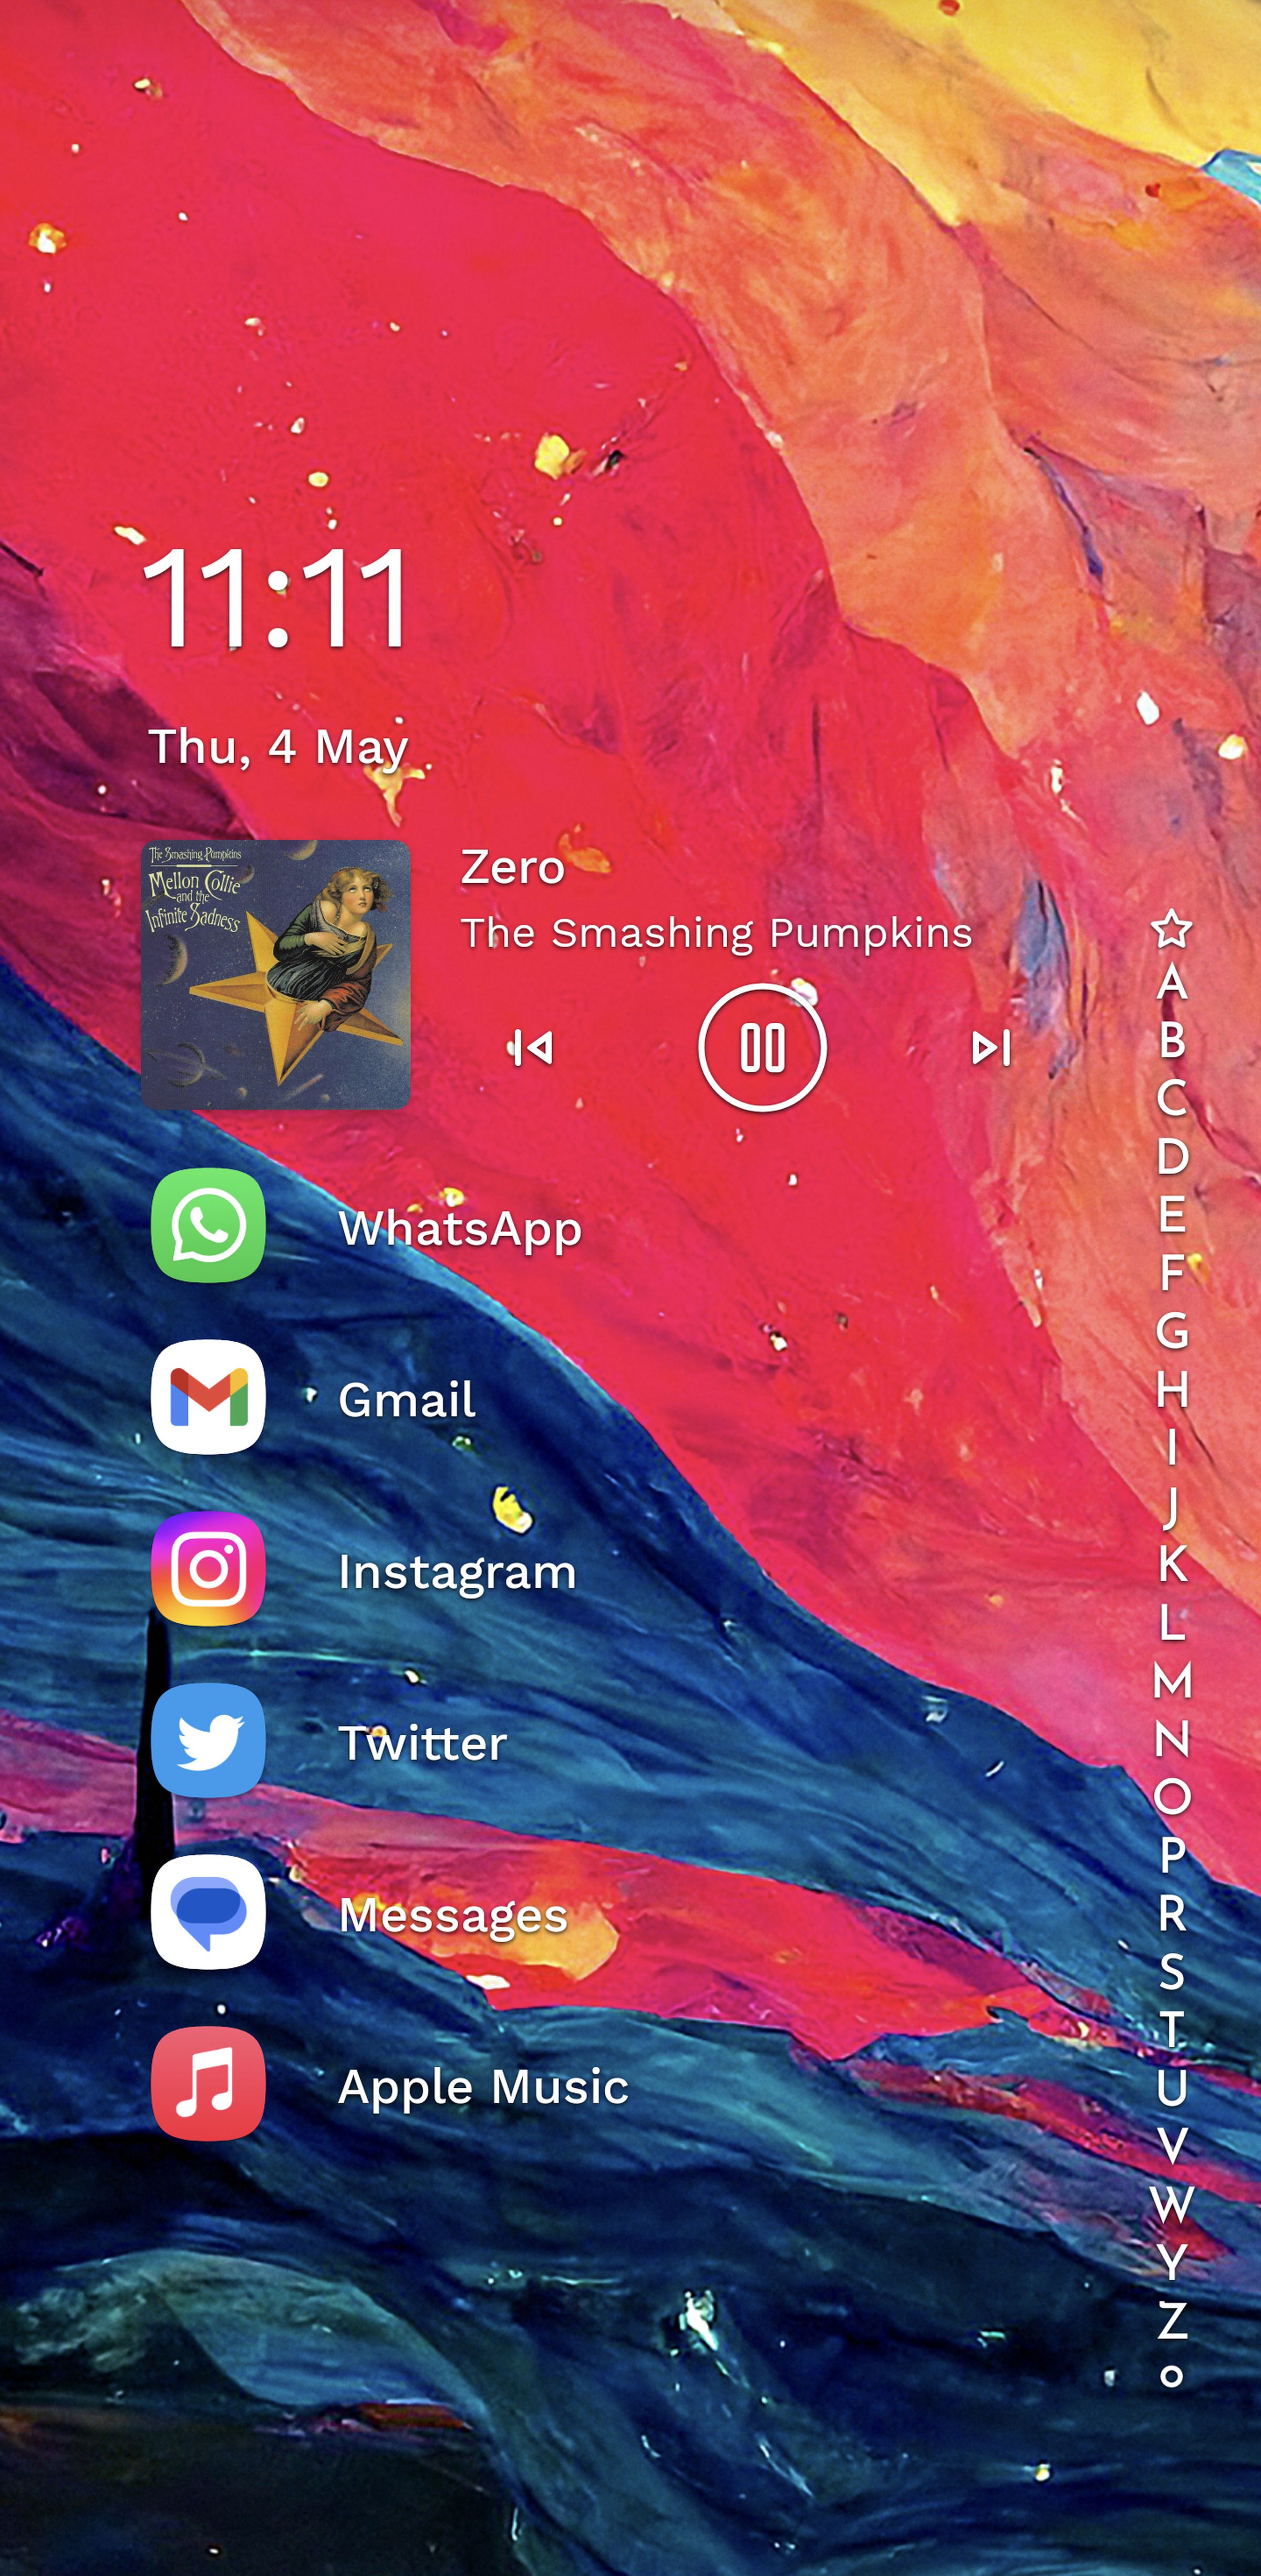 Home page with time on top, and app icons listed in a line below against colorful wallpaper.